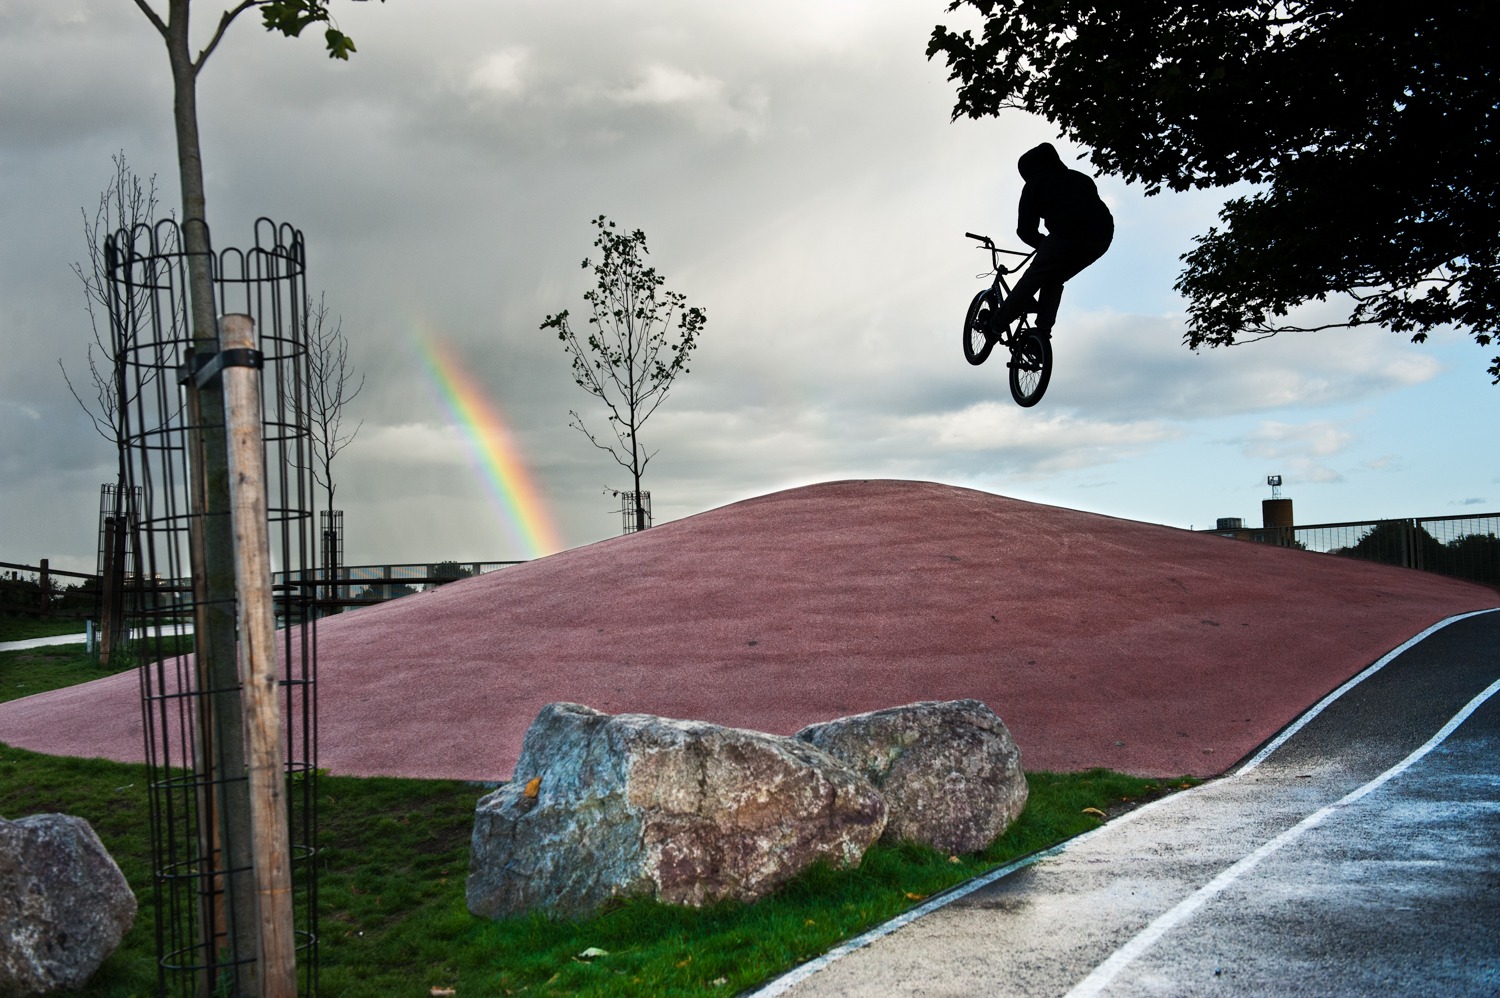 Biz didn't want to taste the rainbow , so we shot a bar fakie in the wet instead.